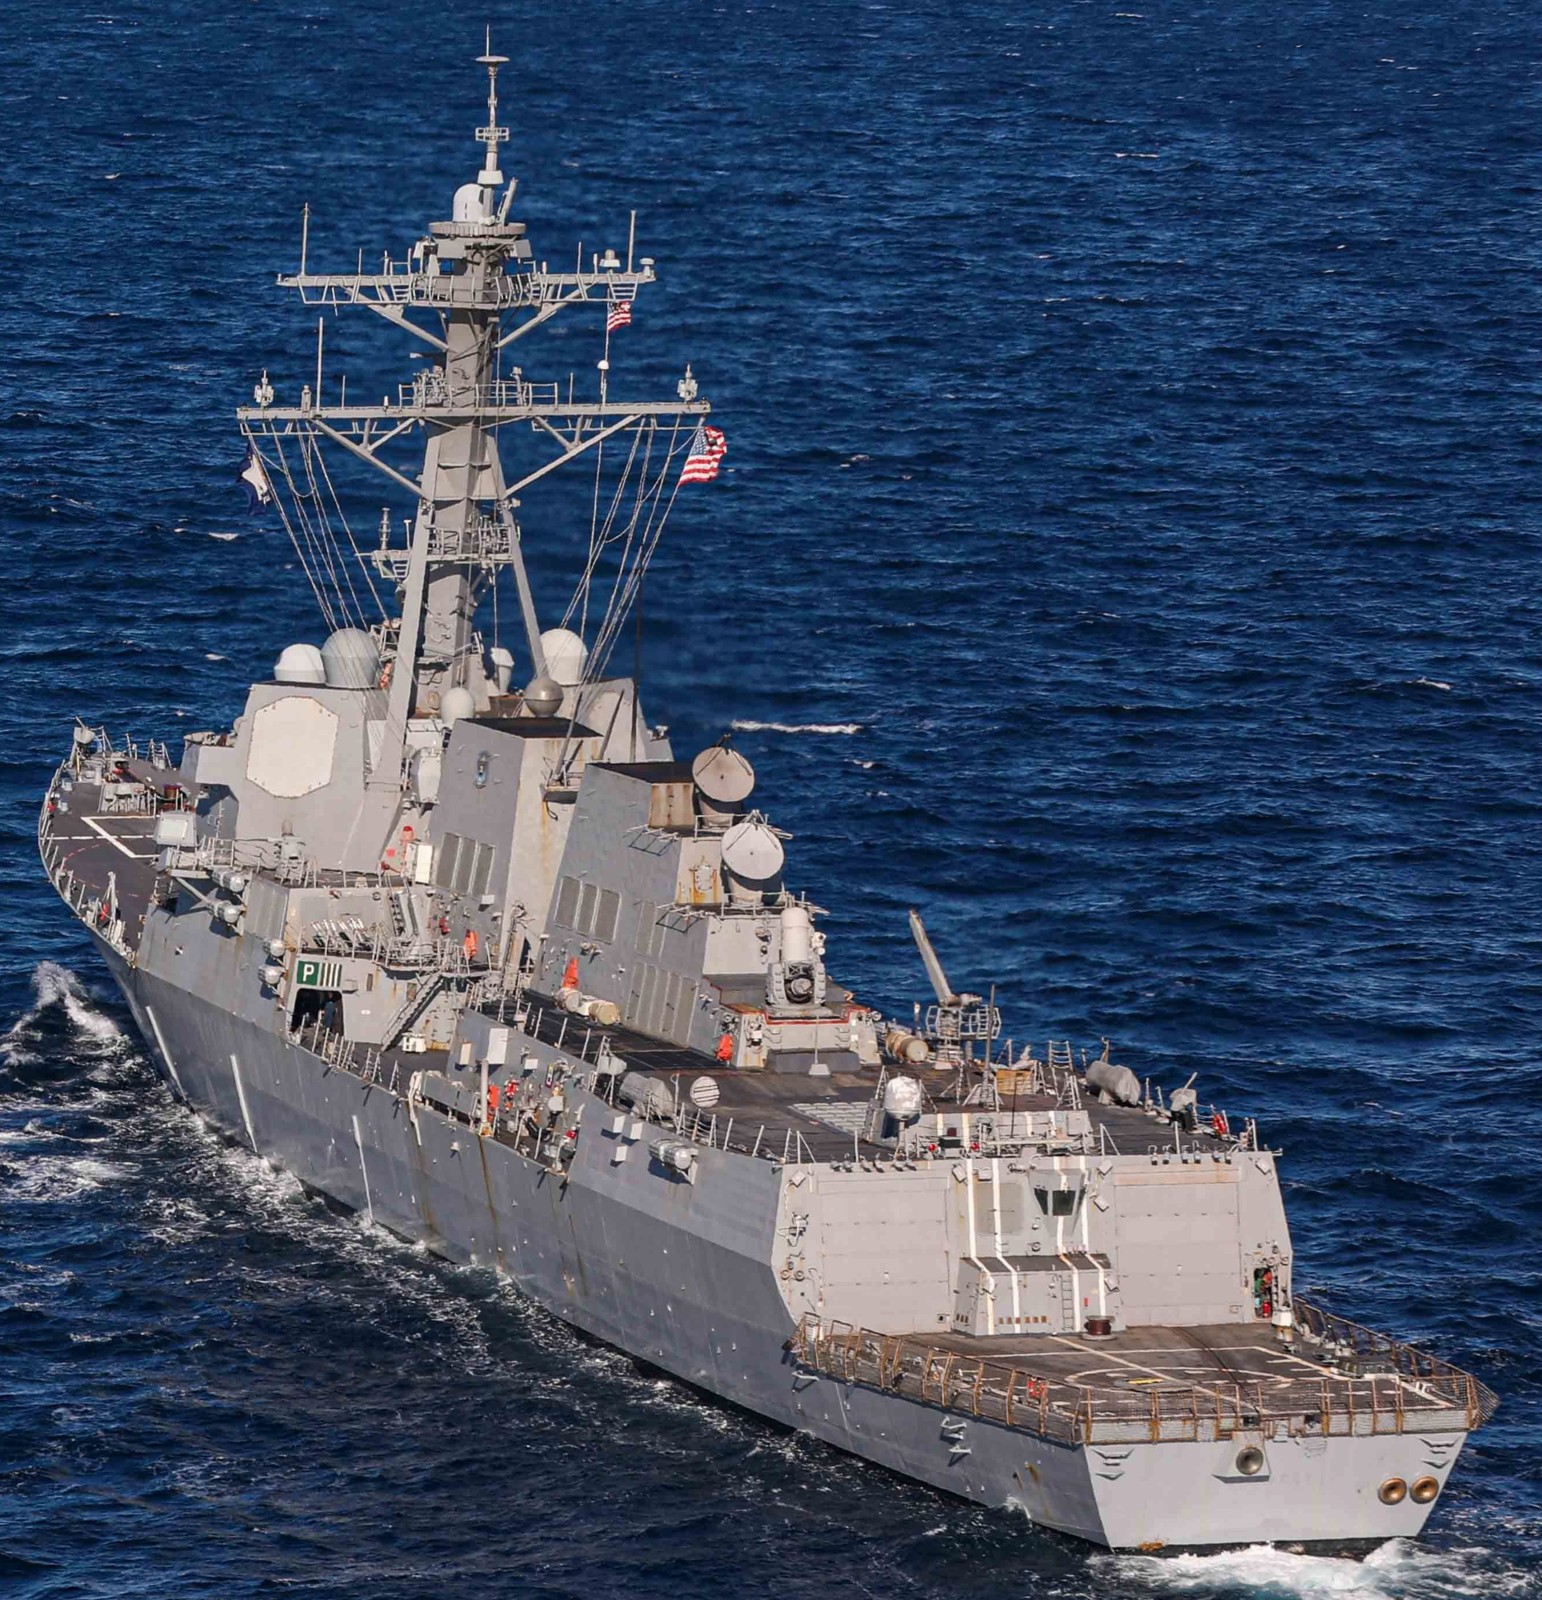 ddg-107 uss gravely arleigh burke class guided missile destroyer aegis us navy adraitic sea 55